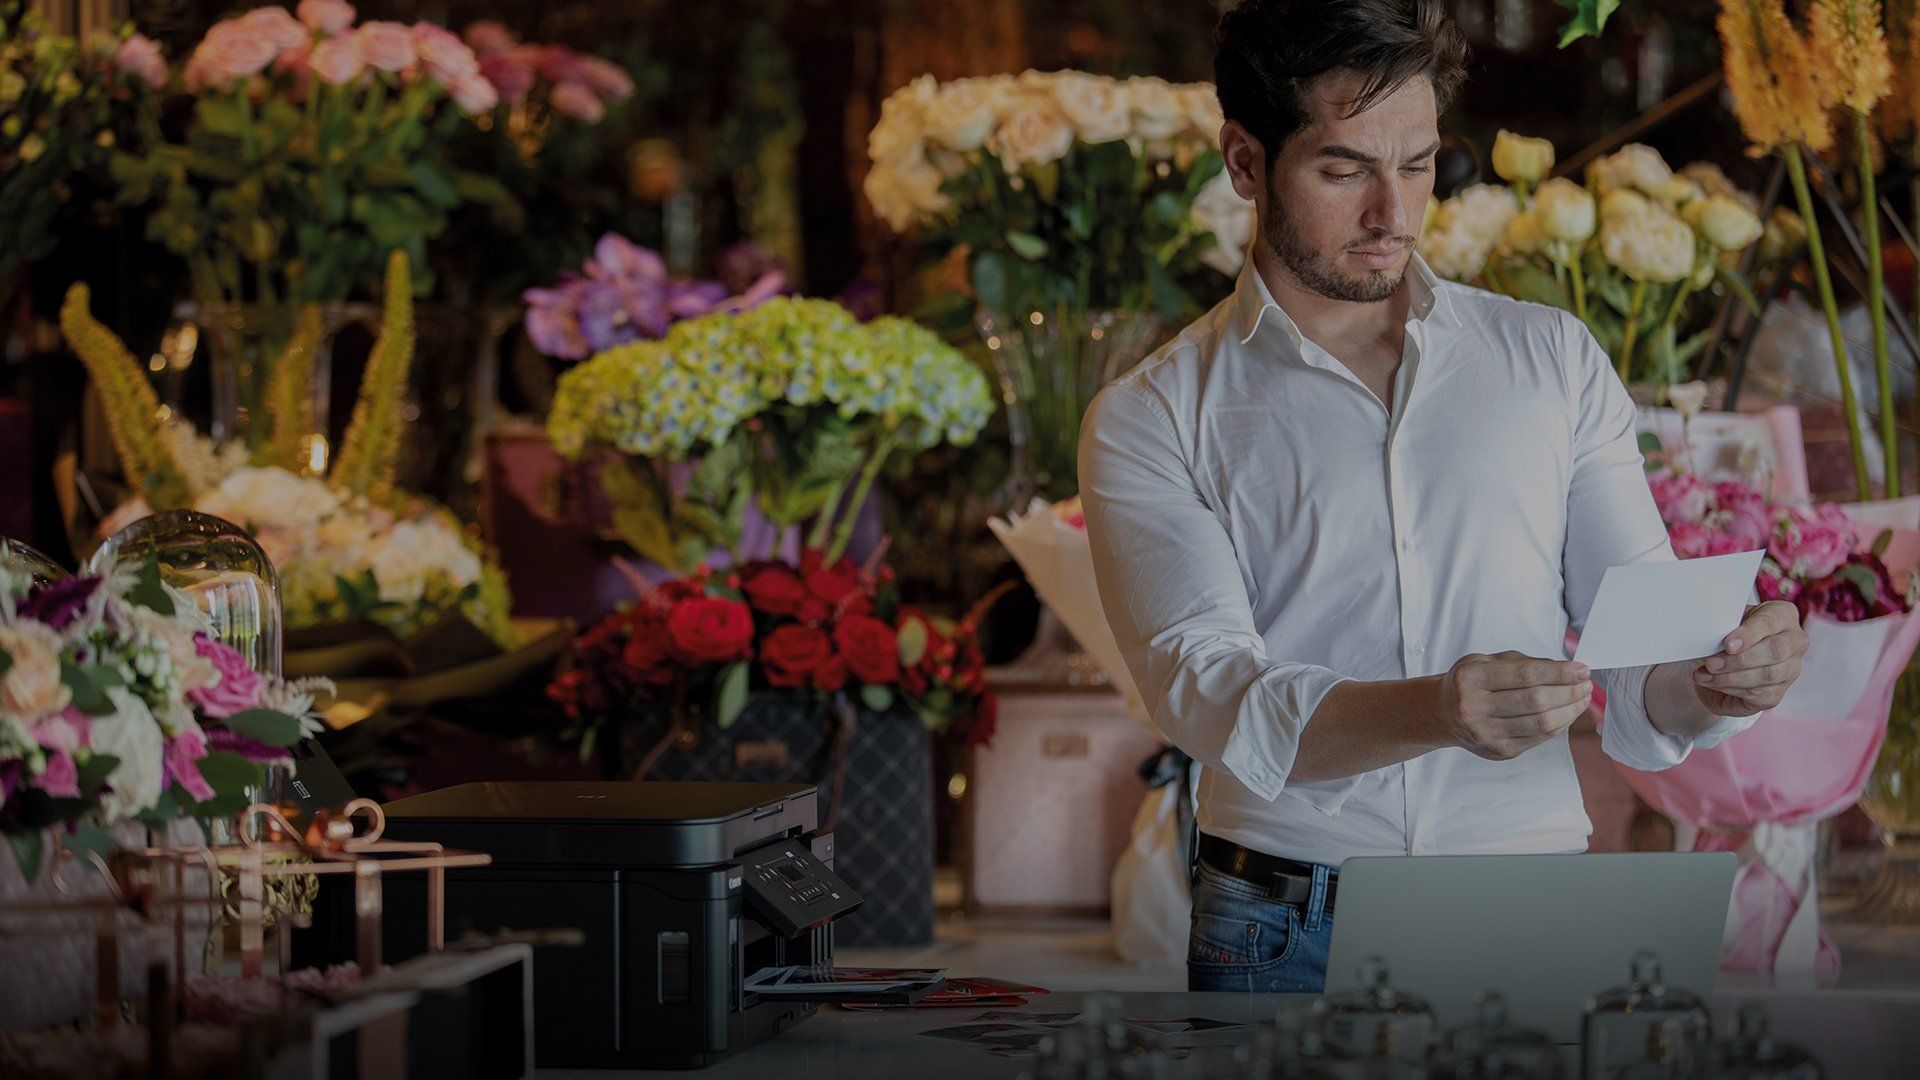 In a room filled with bouquets of flowers, a man holds a print he has made using a Canon PIXMA G6040 that can be seen on the table in front of him.